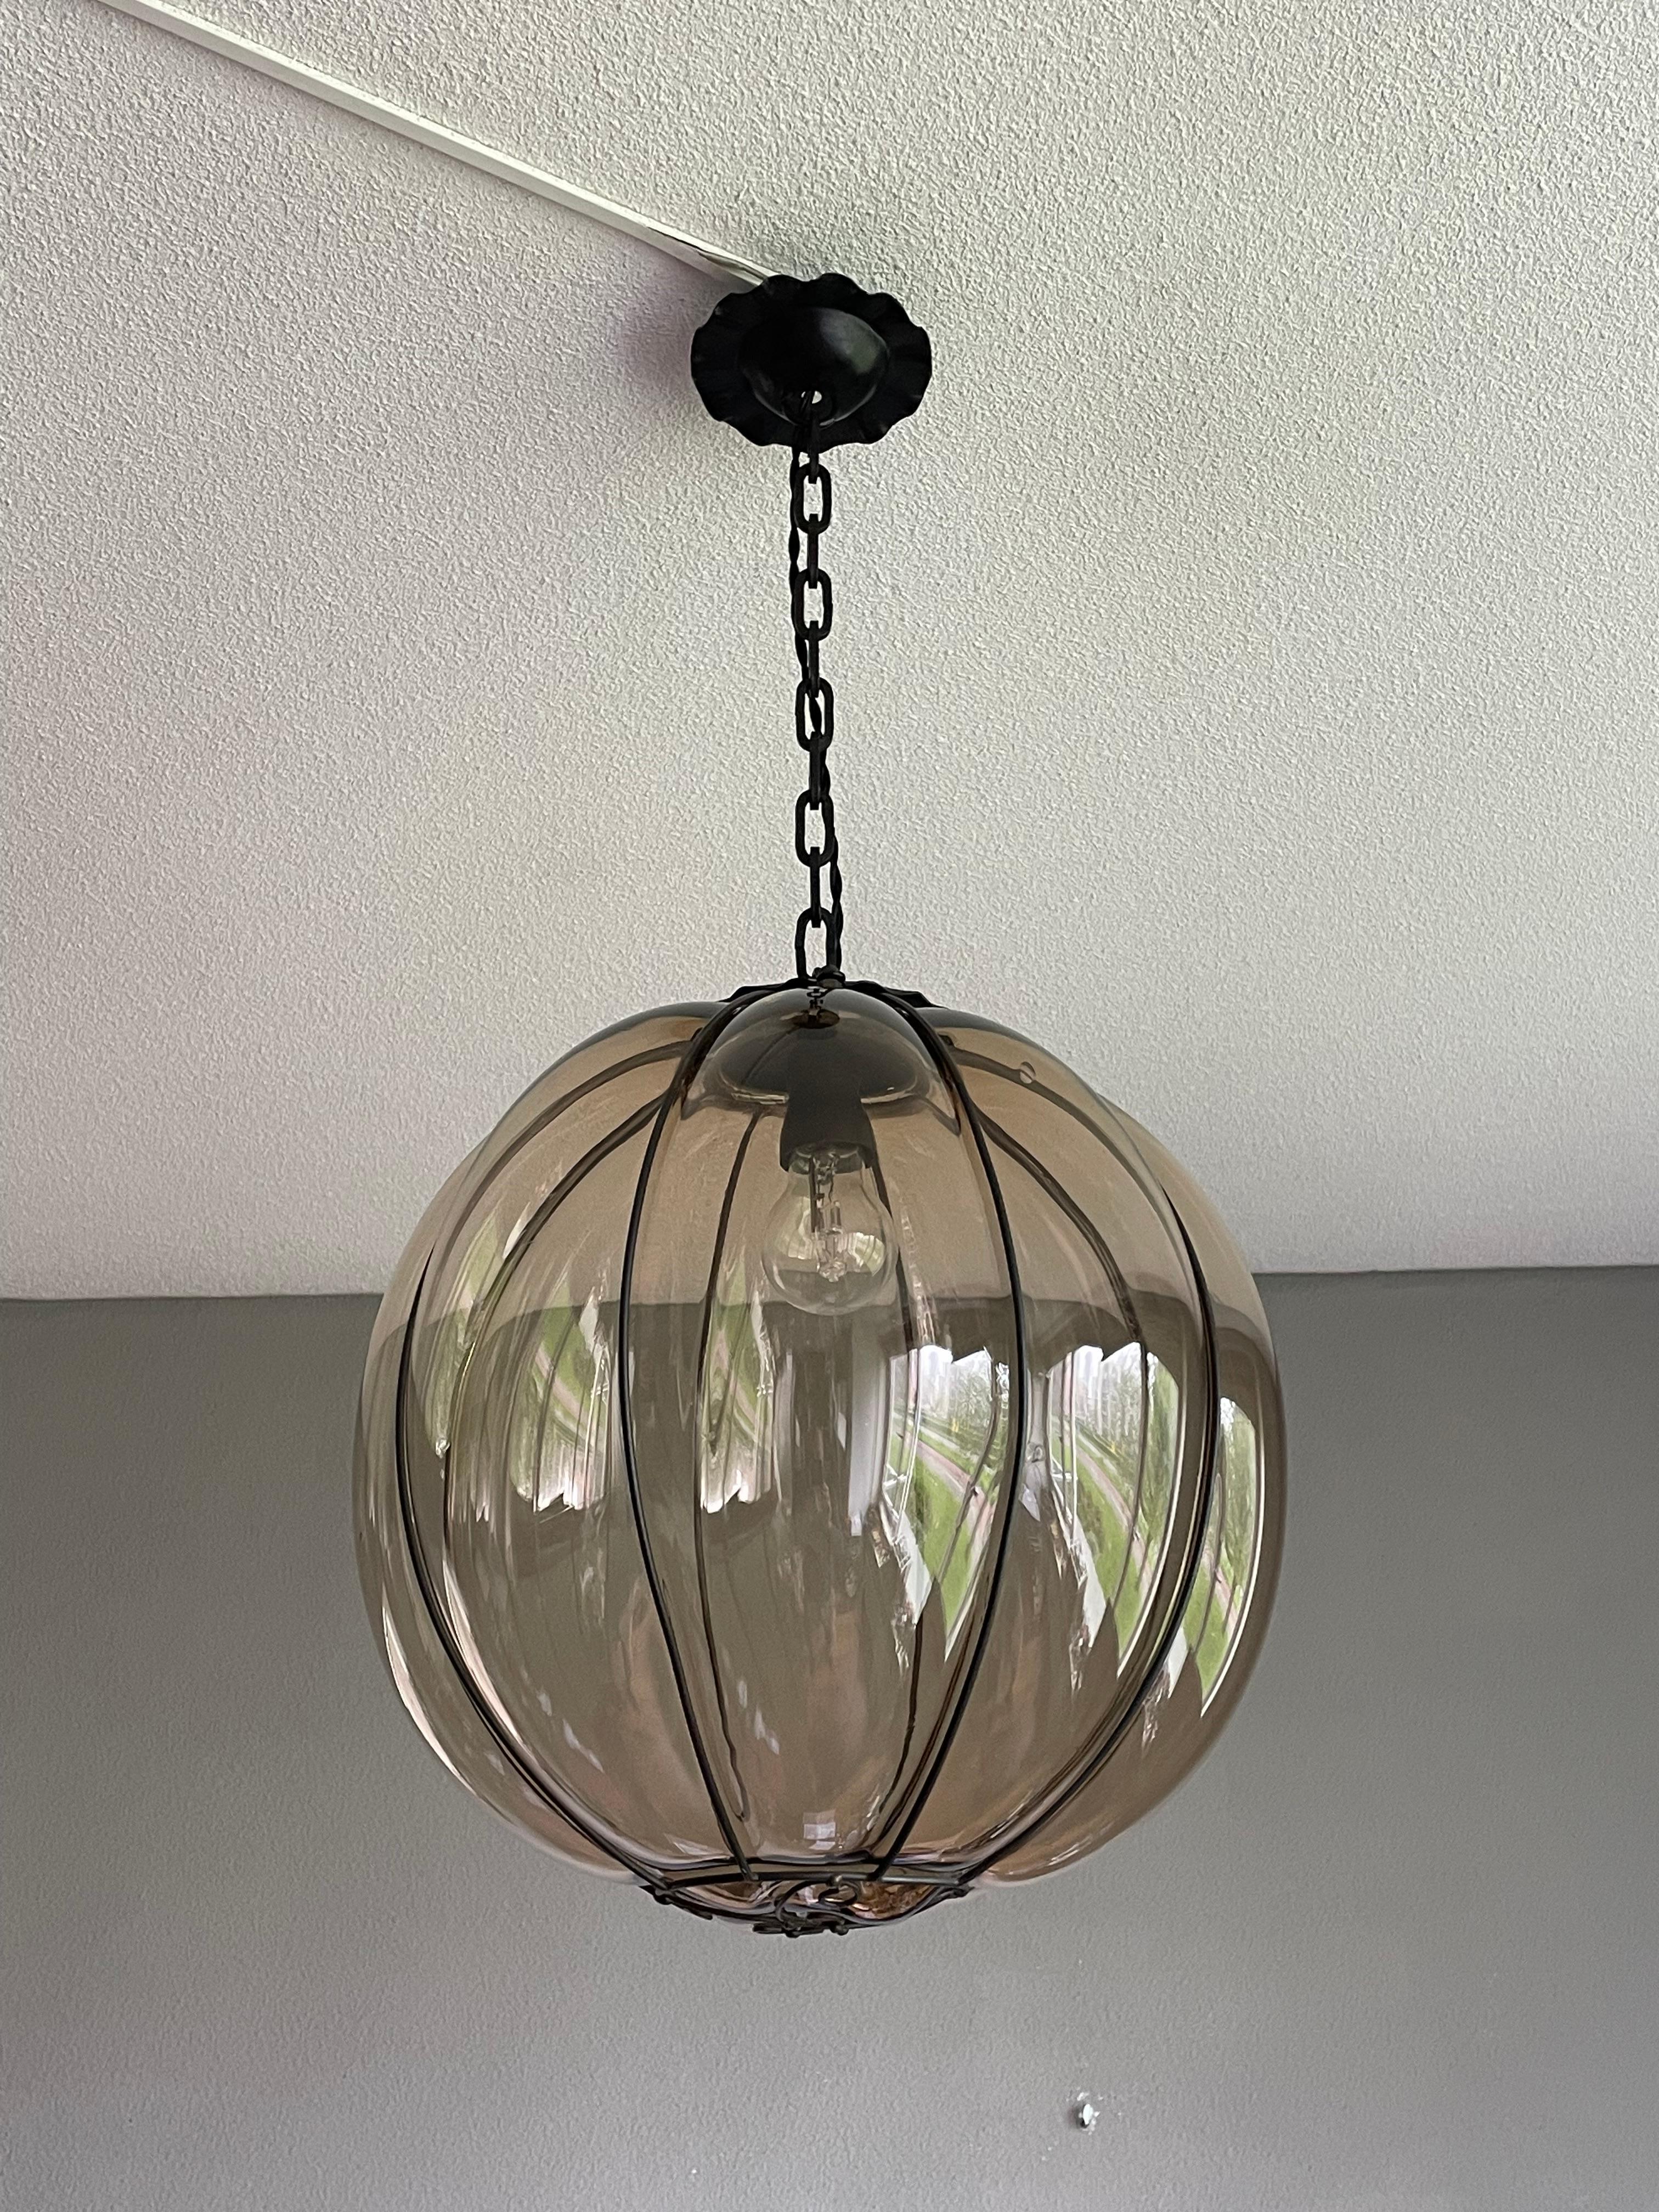 Rare Midcentury Venetian Mouth Blown Glass in Iron Frame Pendant / Chandelier For Sale 9